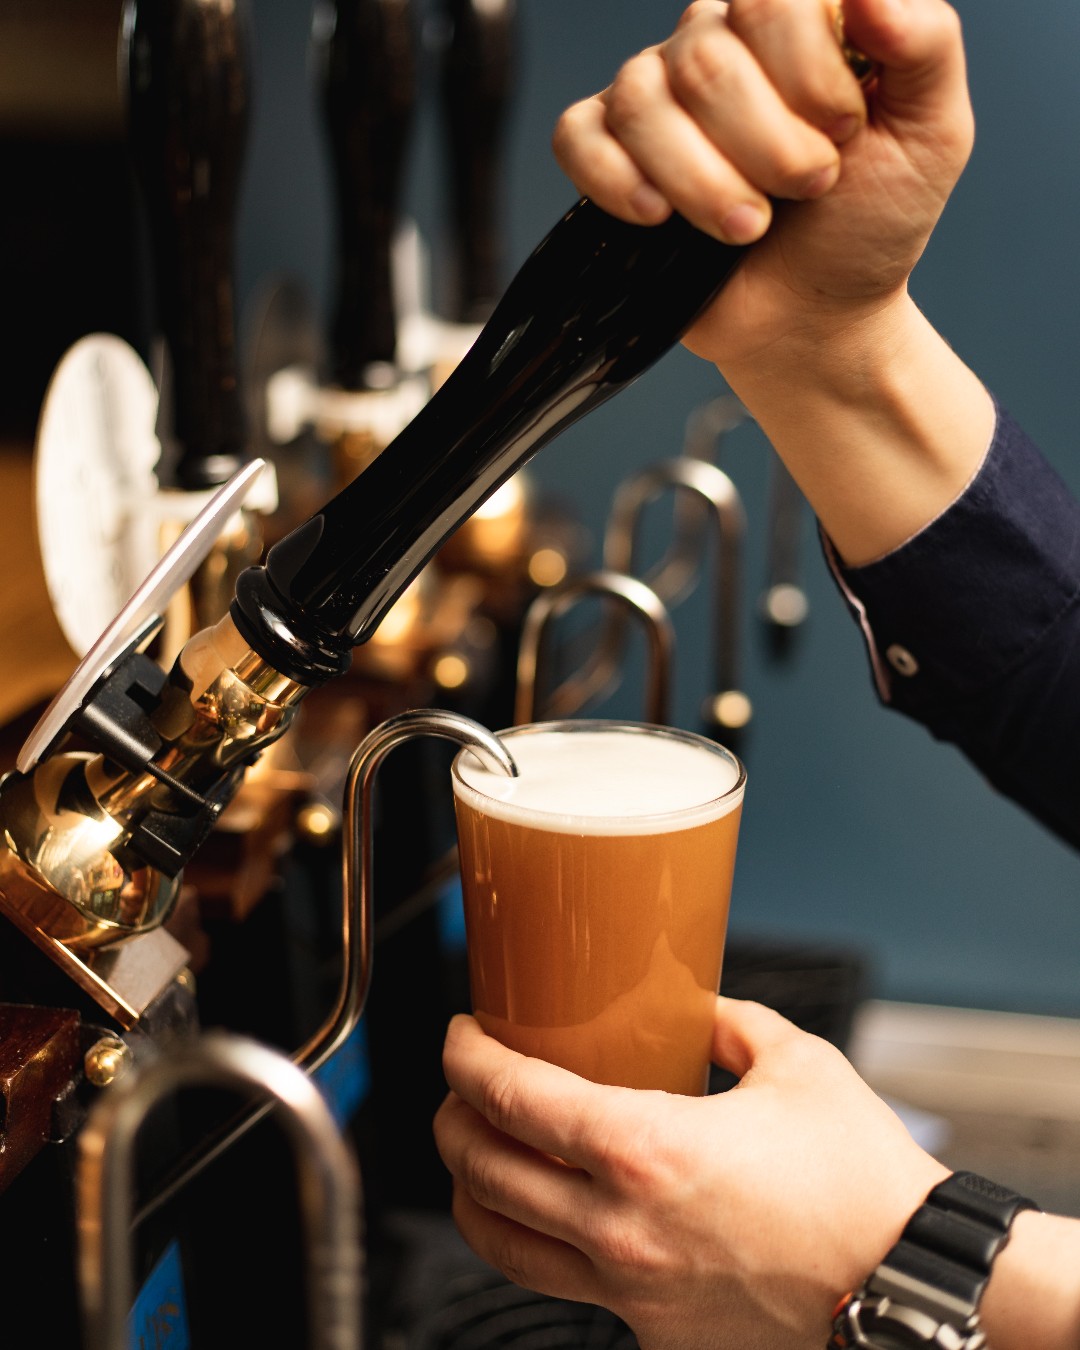 Pouring a pint of cask ale